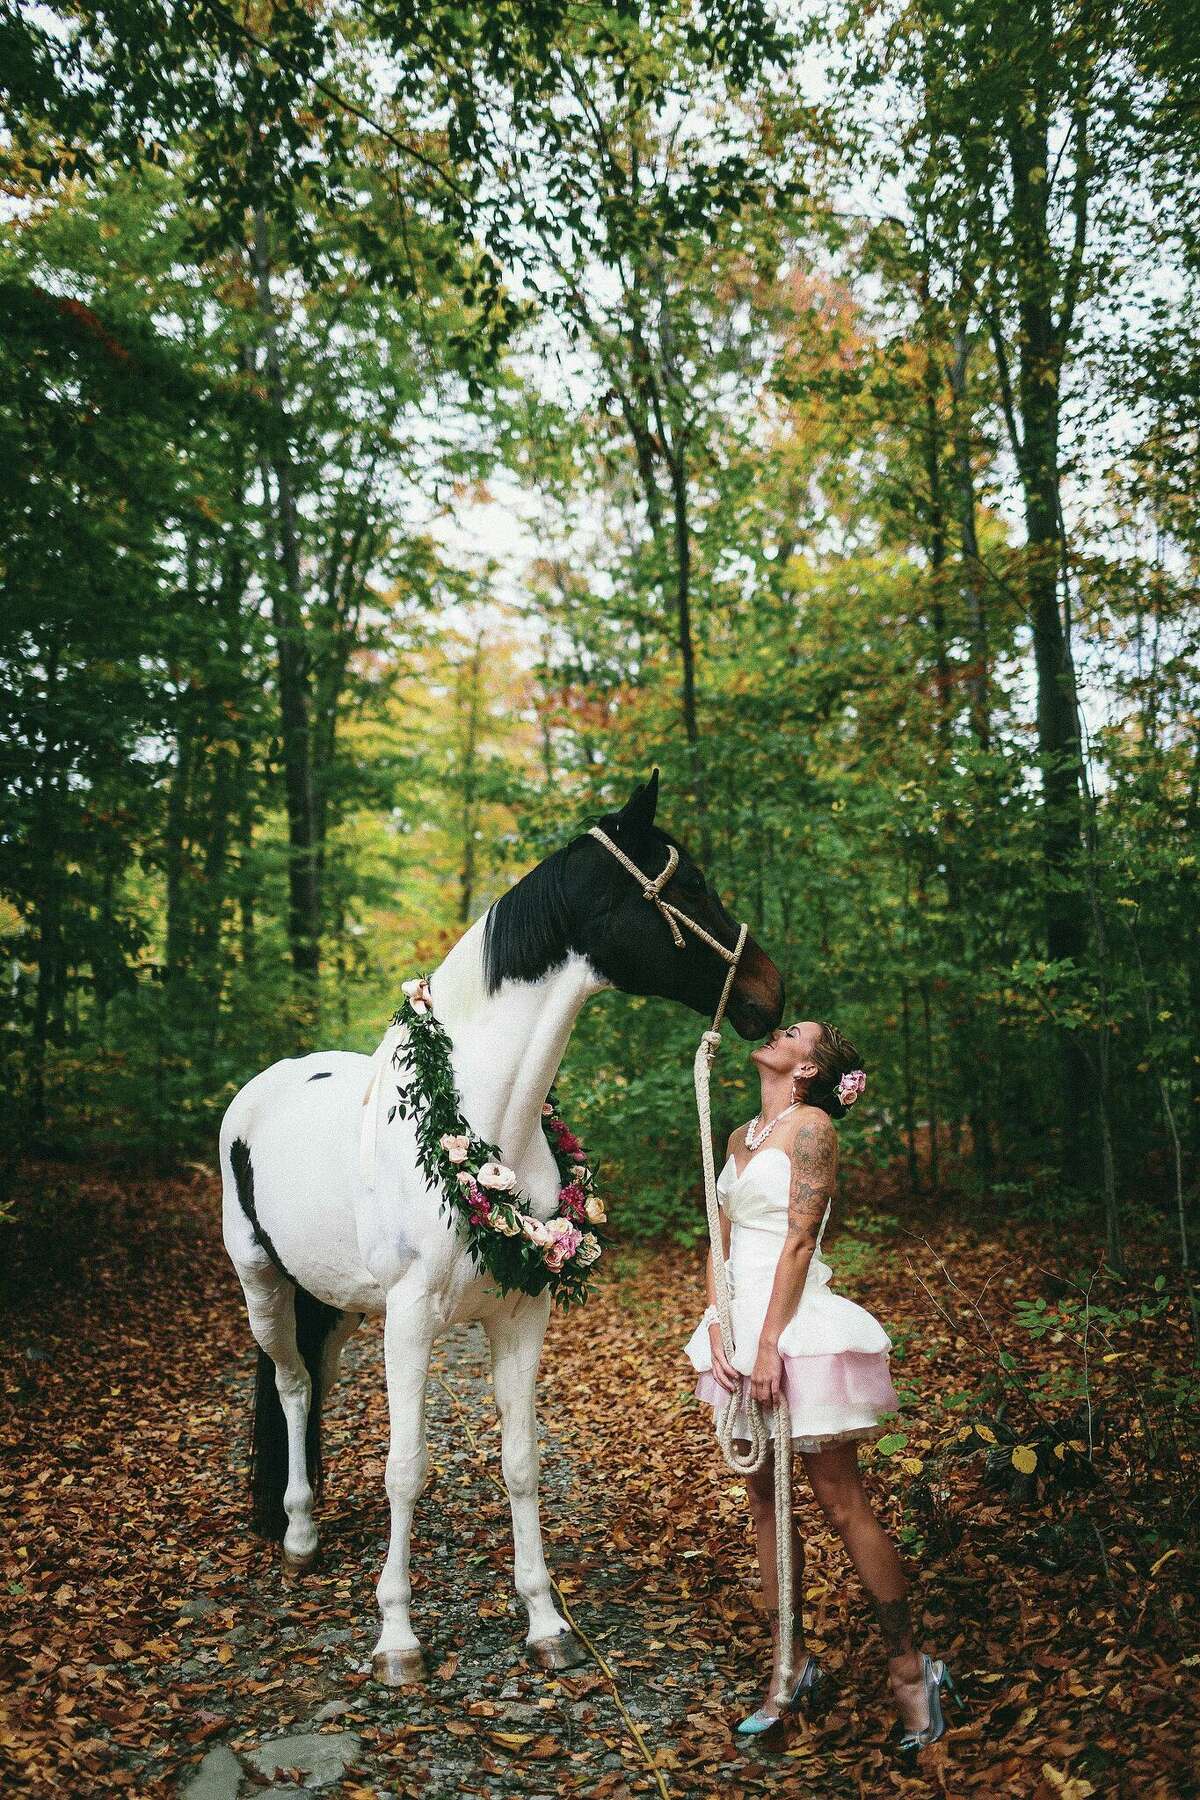 Incorporating beloved animals can make your wedding day even more special.